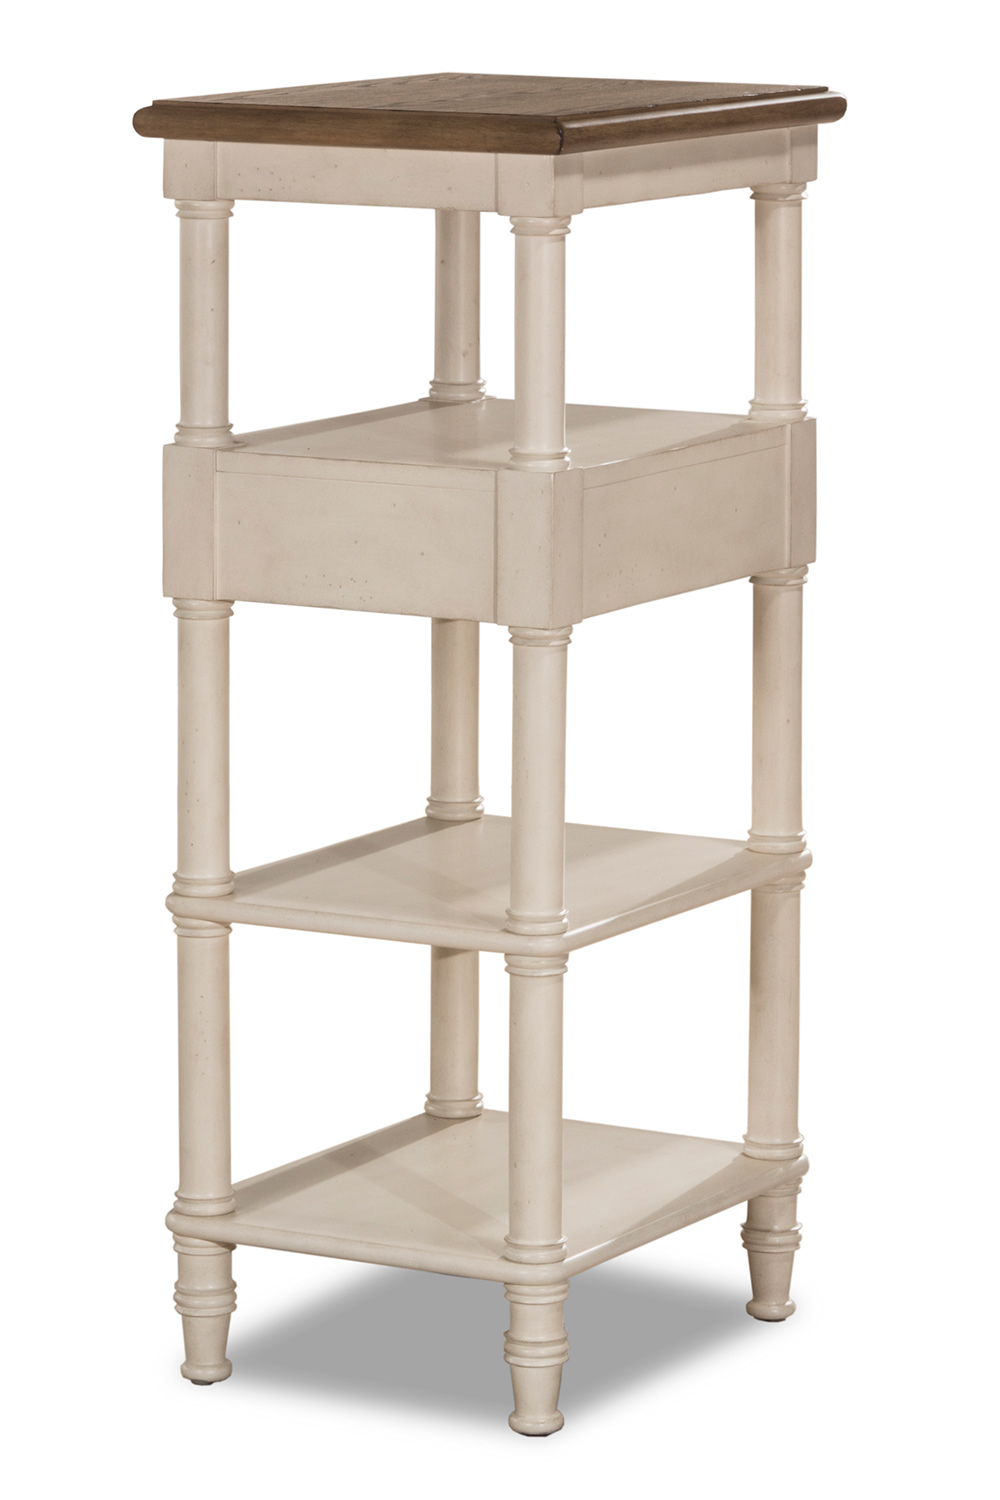 Hillsdale Seneca Tall Basket Stand with Middle Drawer - Driftwood/Sea White